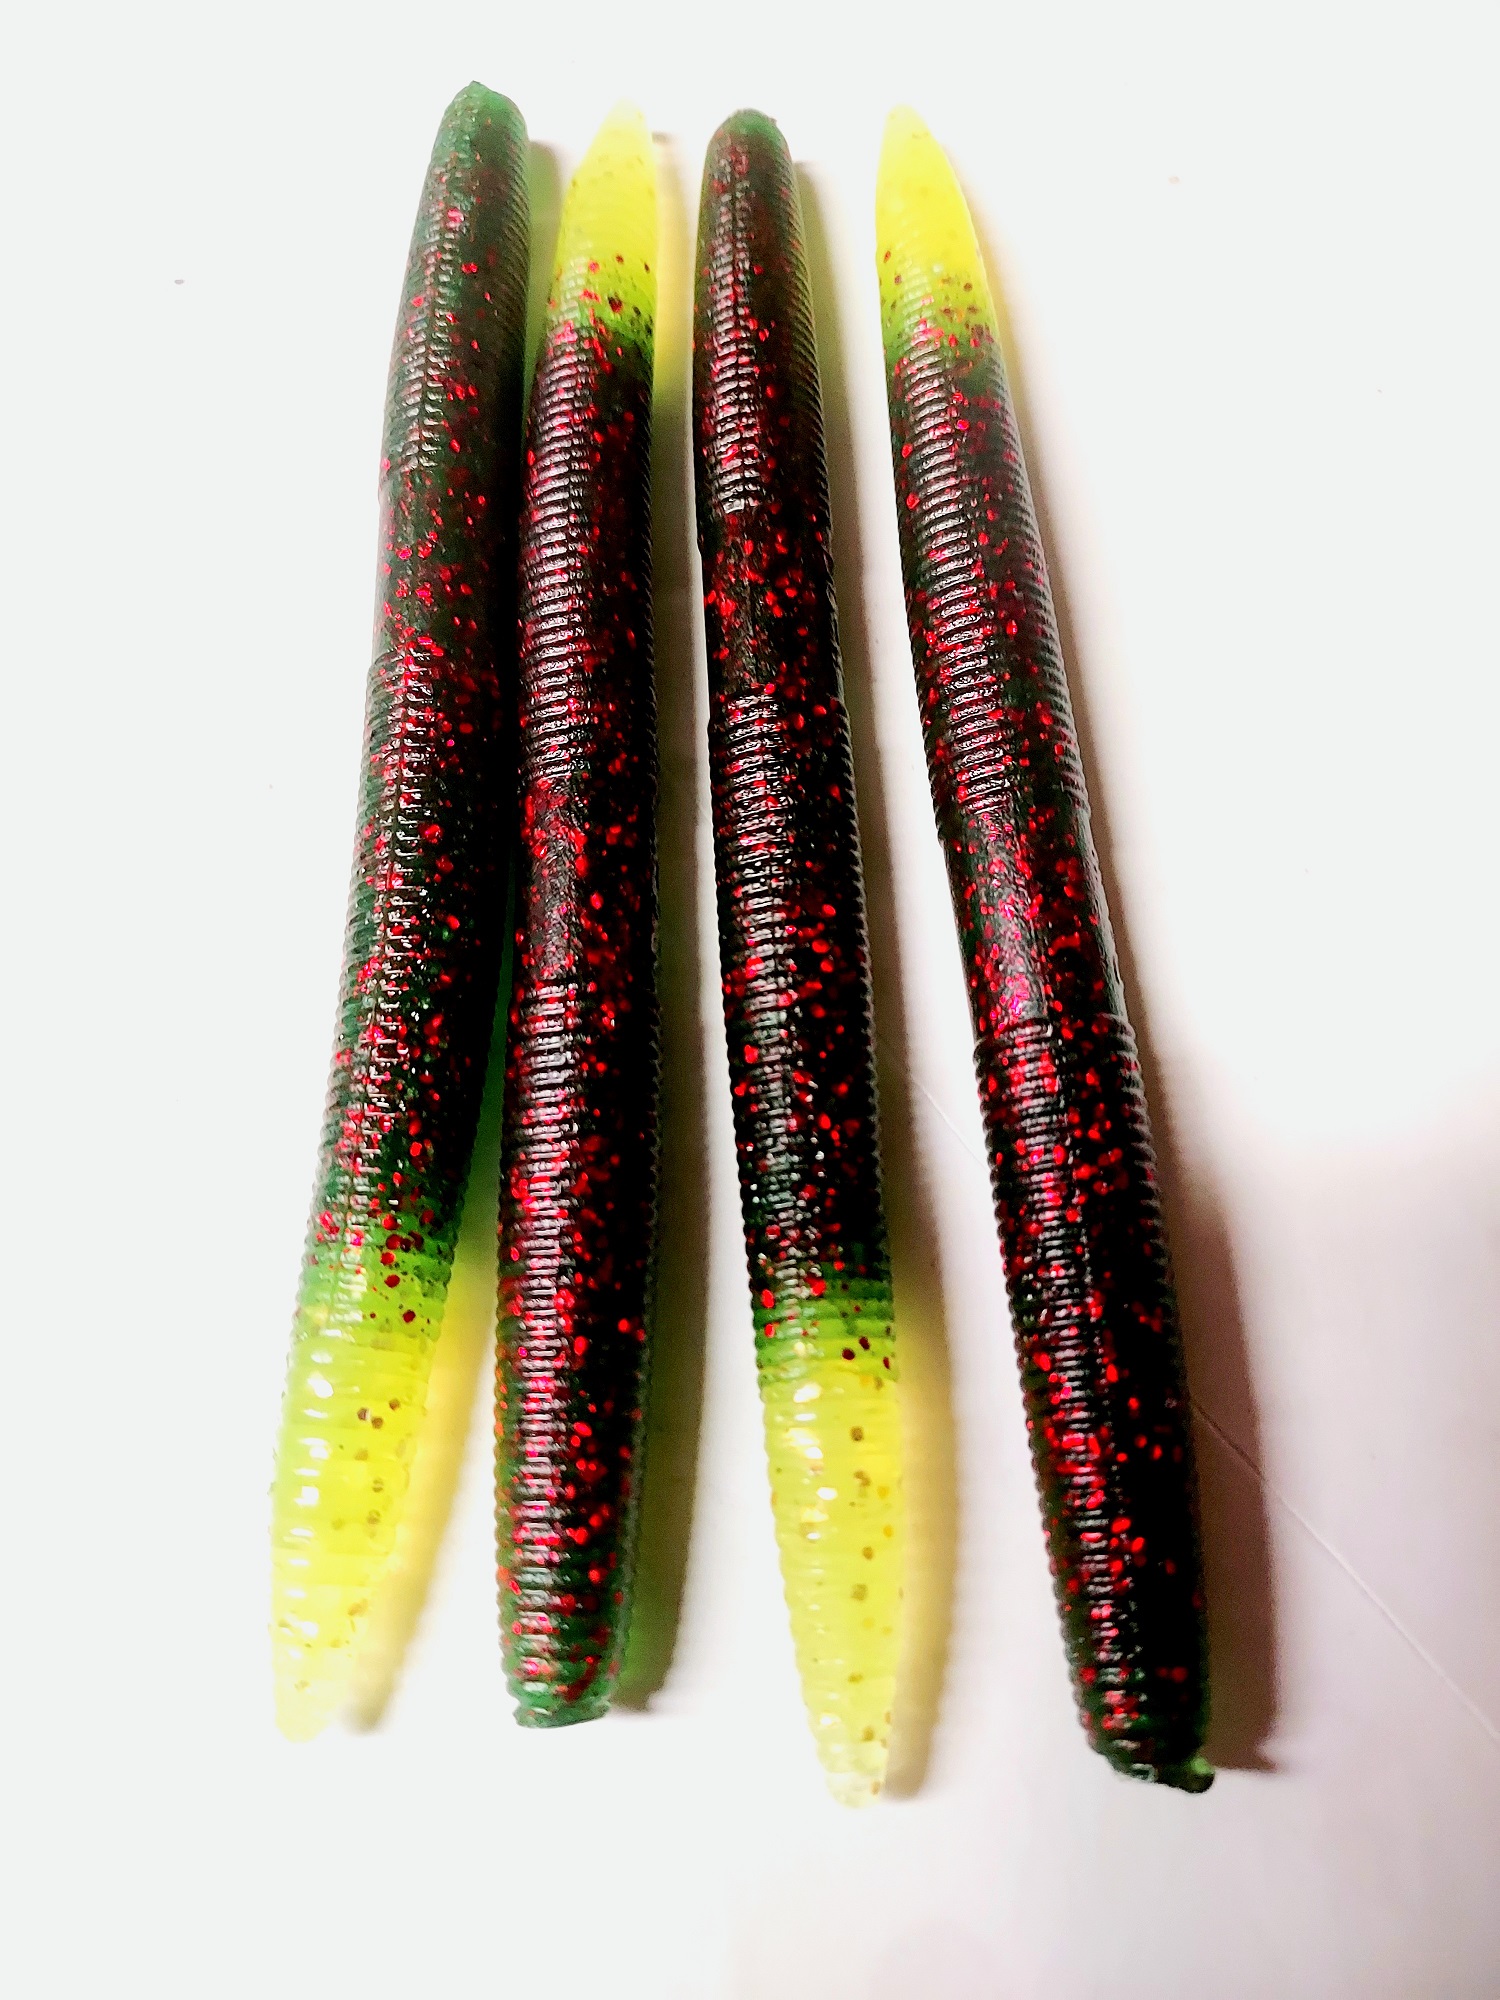 Stick bait 6 inches . All tails will be chartreuse. The main body